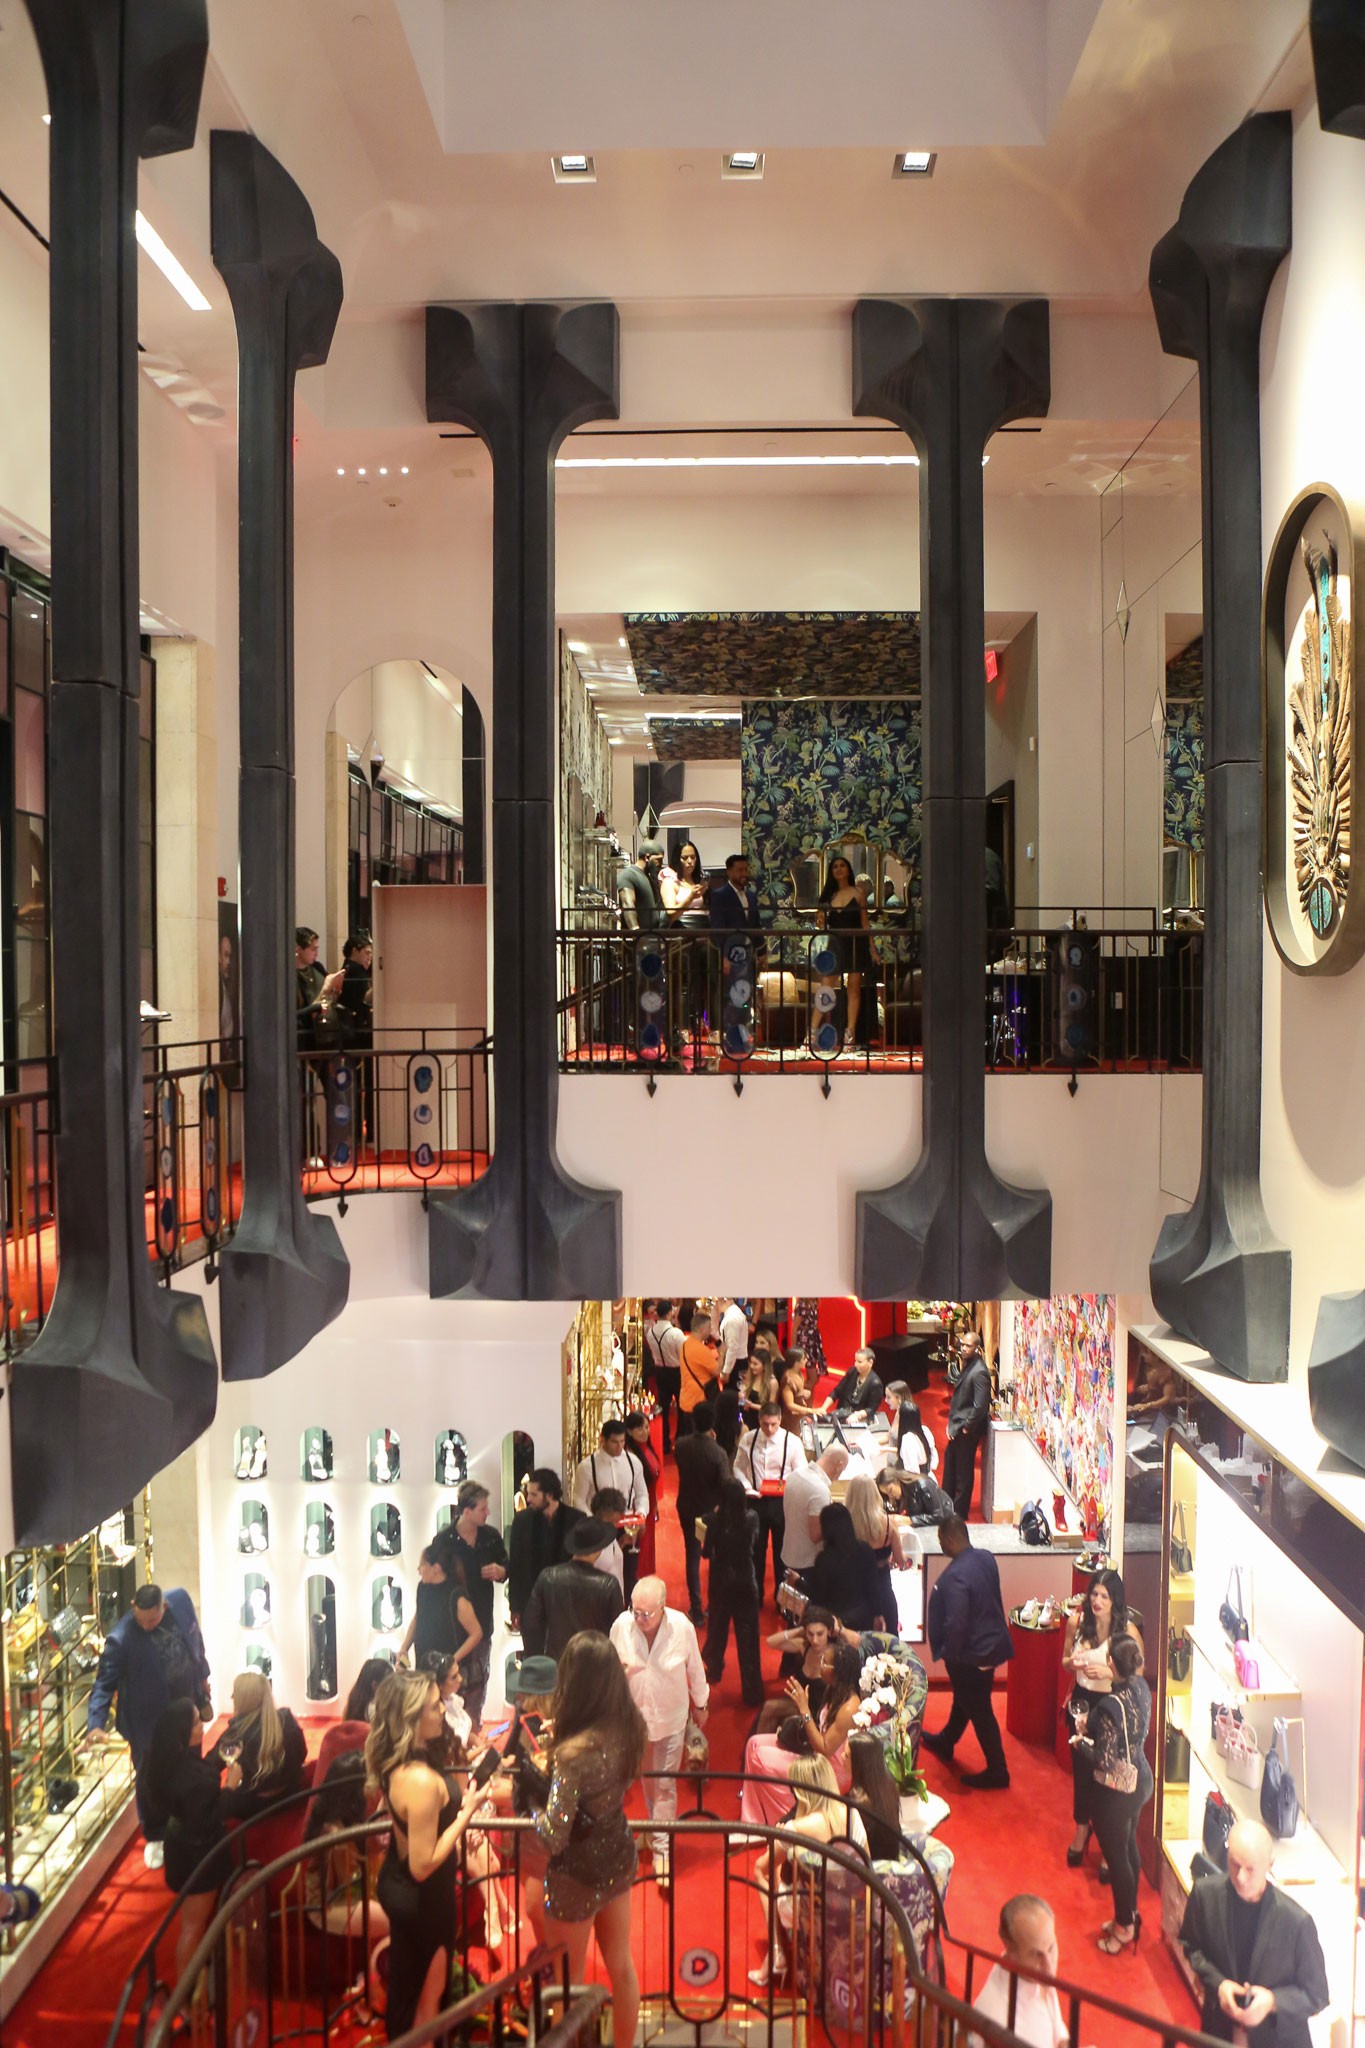 Christian Louboutin in-store Reception Hosted Christian Louboutin